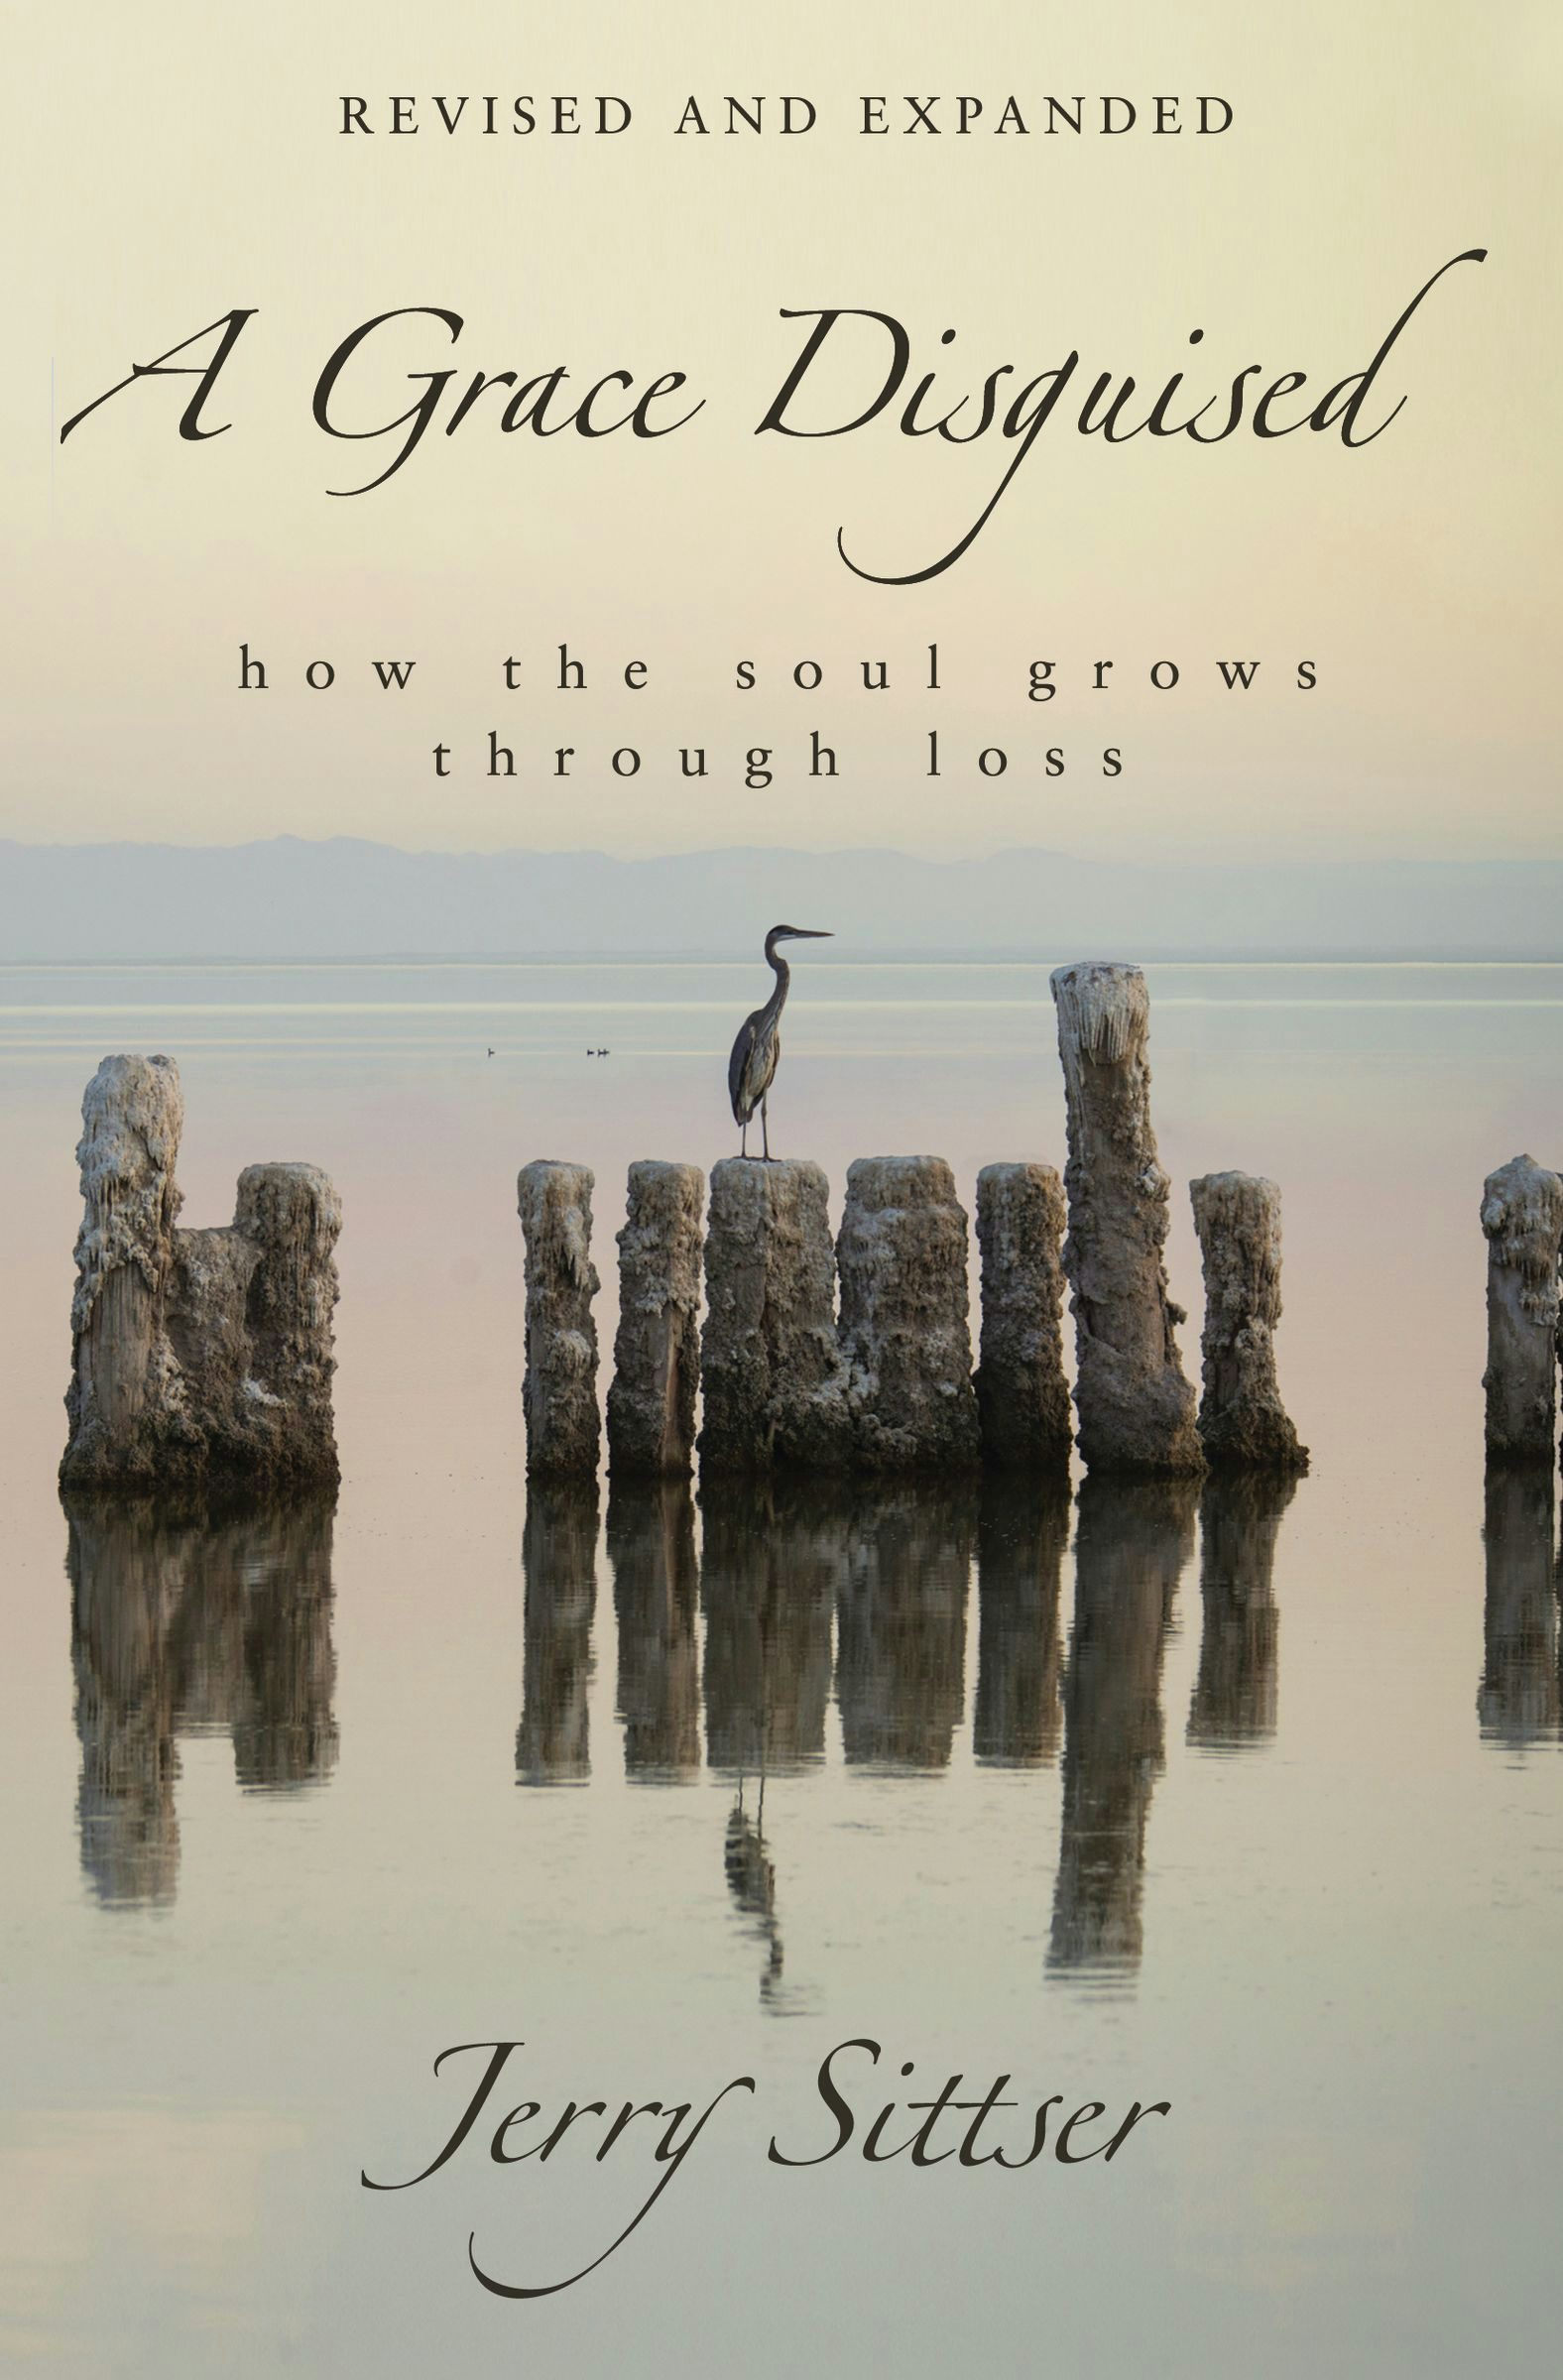 A Grace Disguised How the Soul Grows through Loss